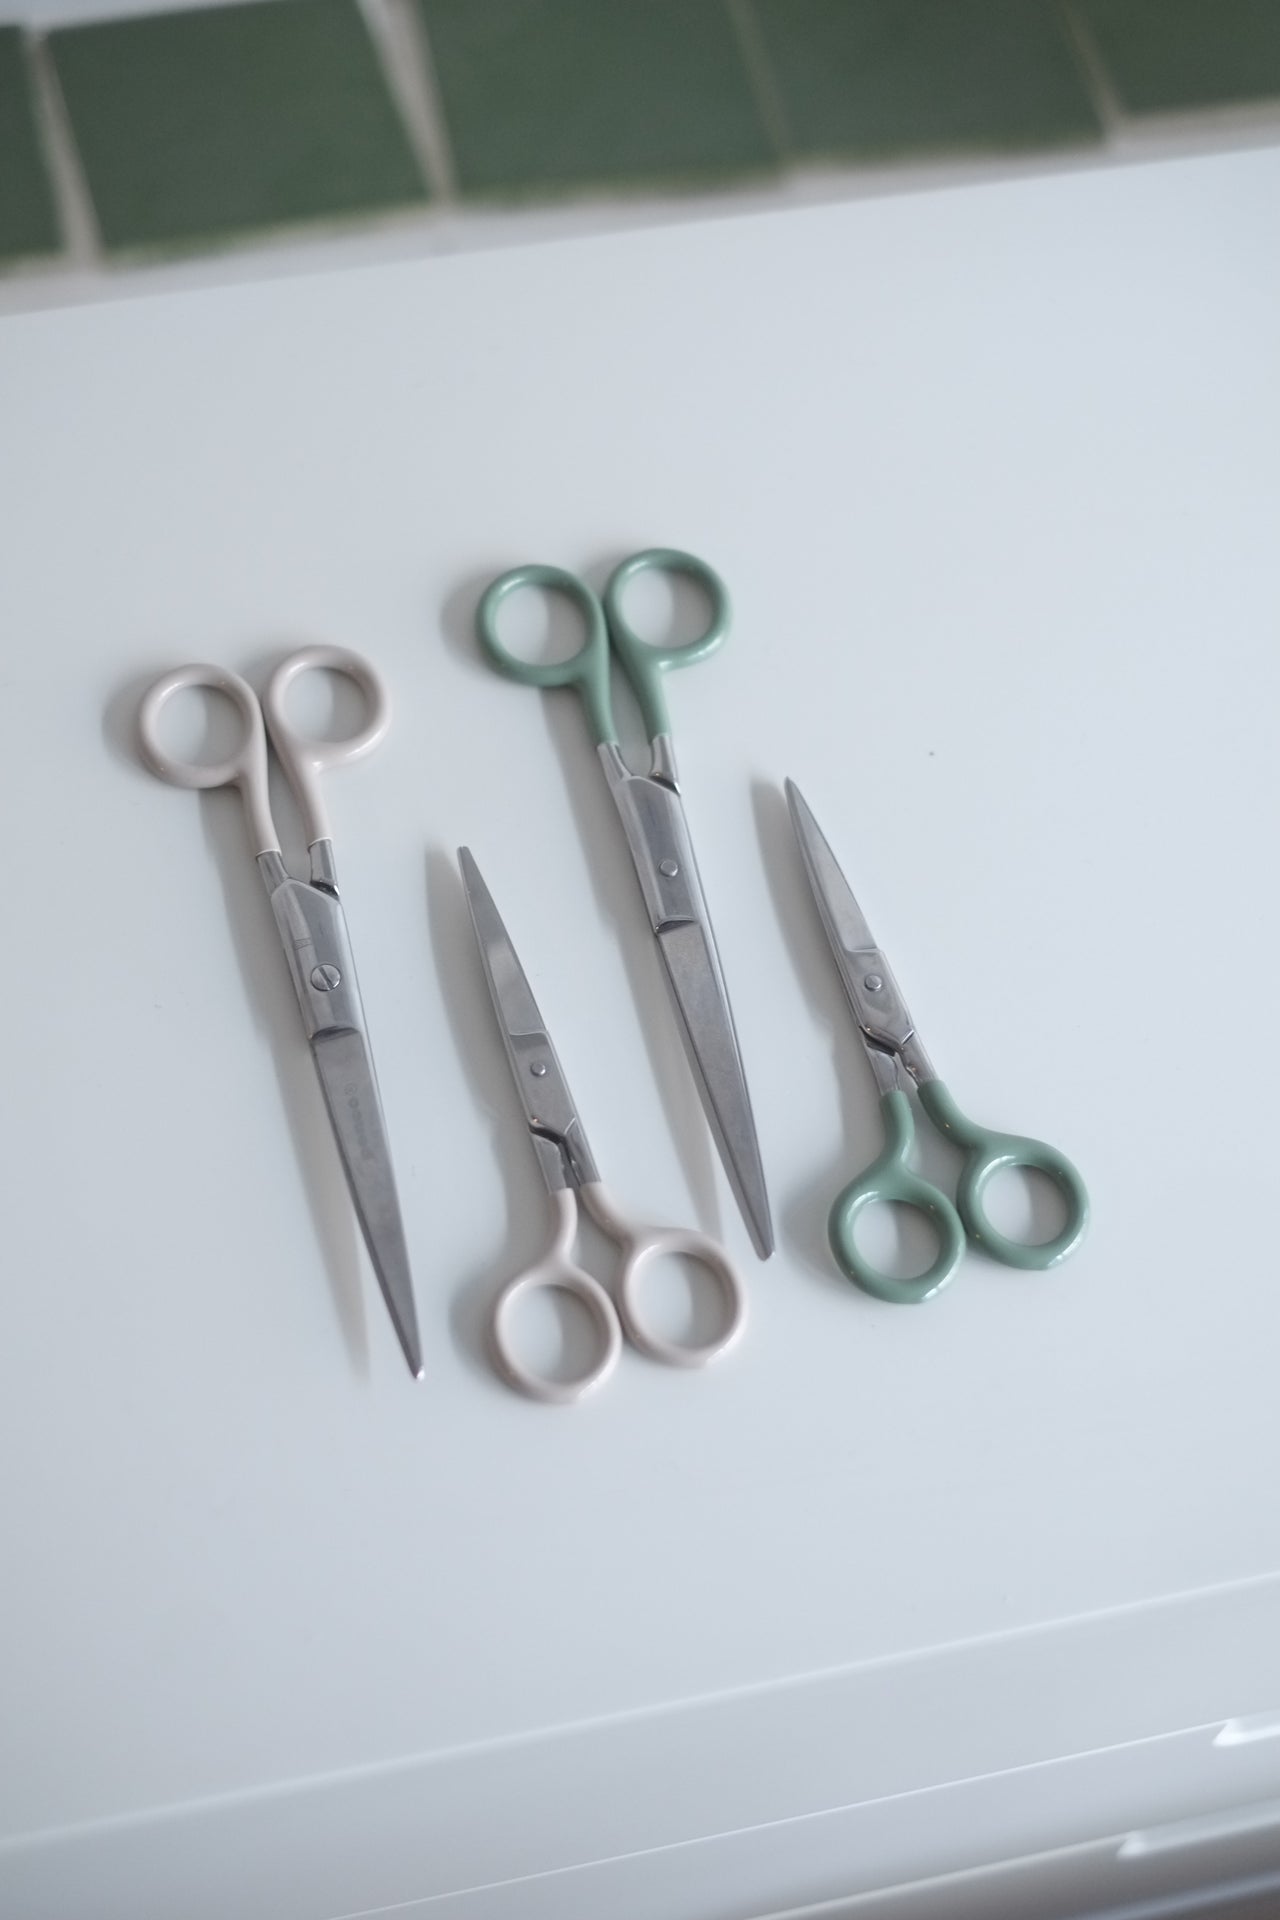 Stainless steel scissors by Penco